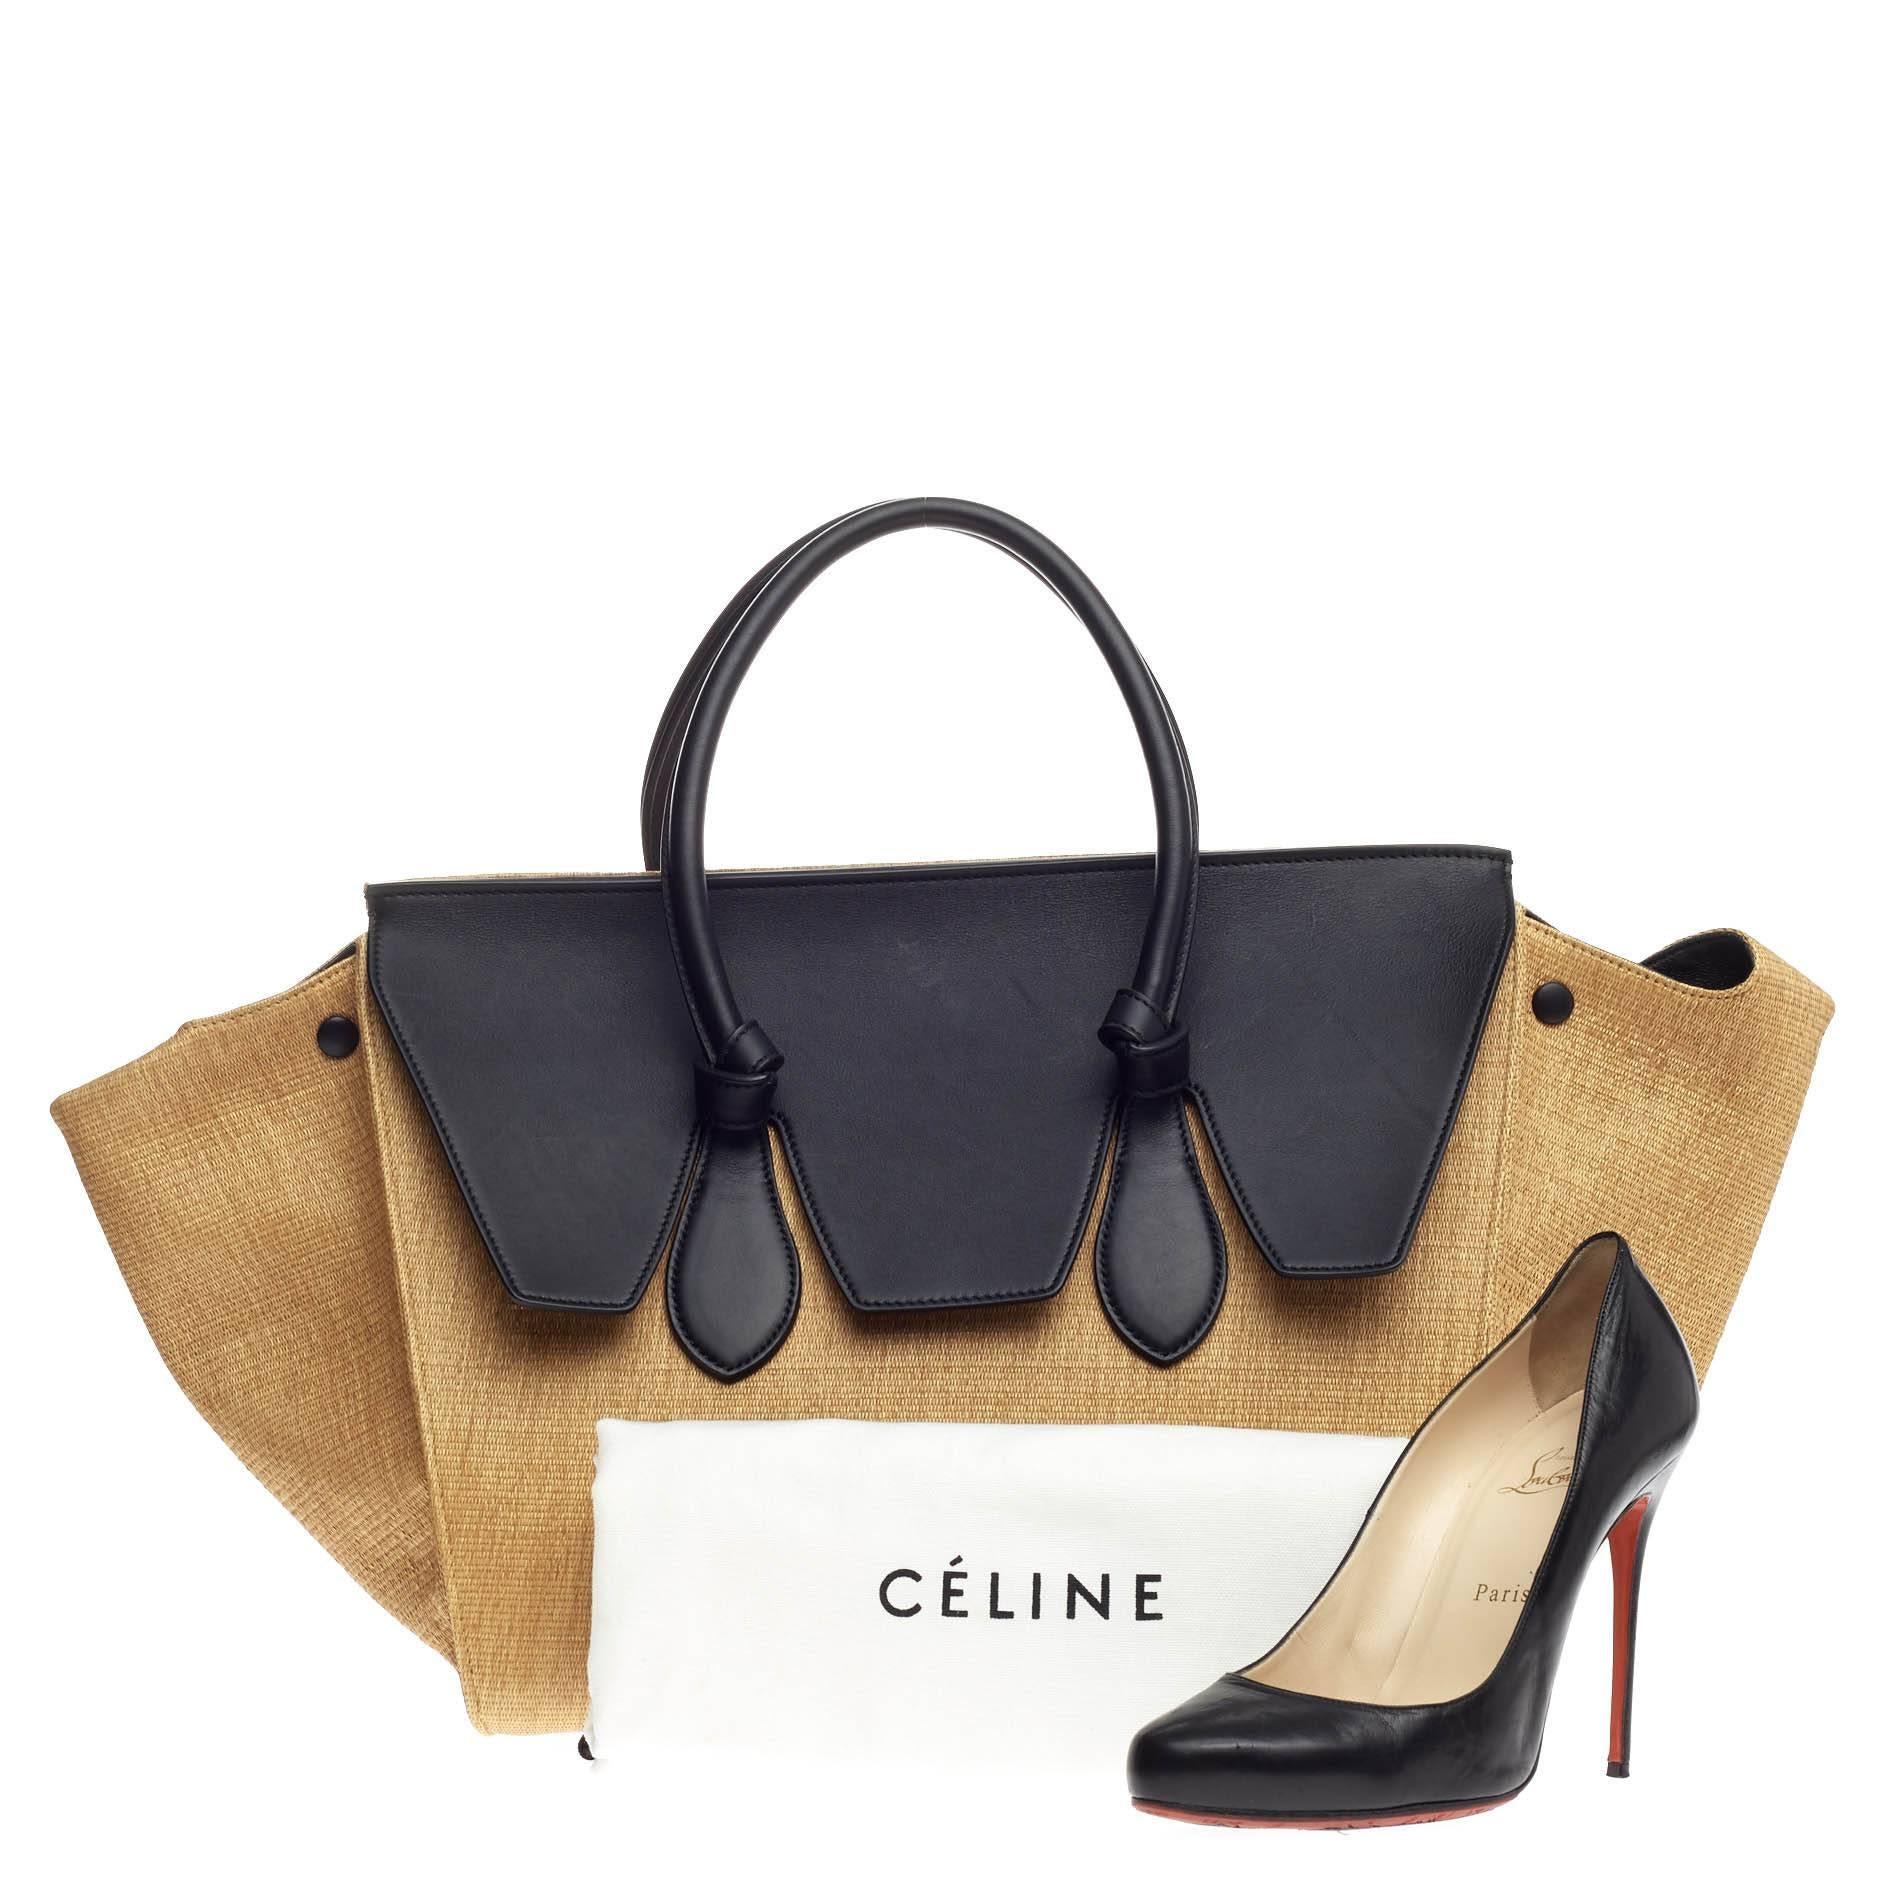 This authentic Celine Tie Tote Raffia and Leather Small is an absolute must-have for serious fashionistas. Crafted from sturdy mustard yellow raffia and black leather, this boxy, casual-chic tote features dual-rolled leather handles with signature